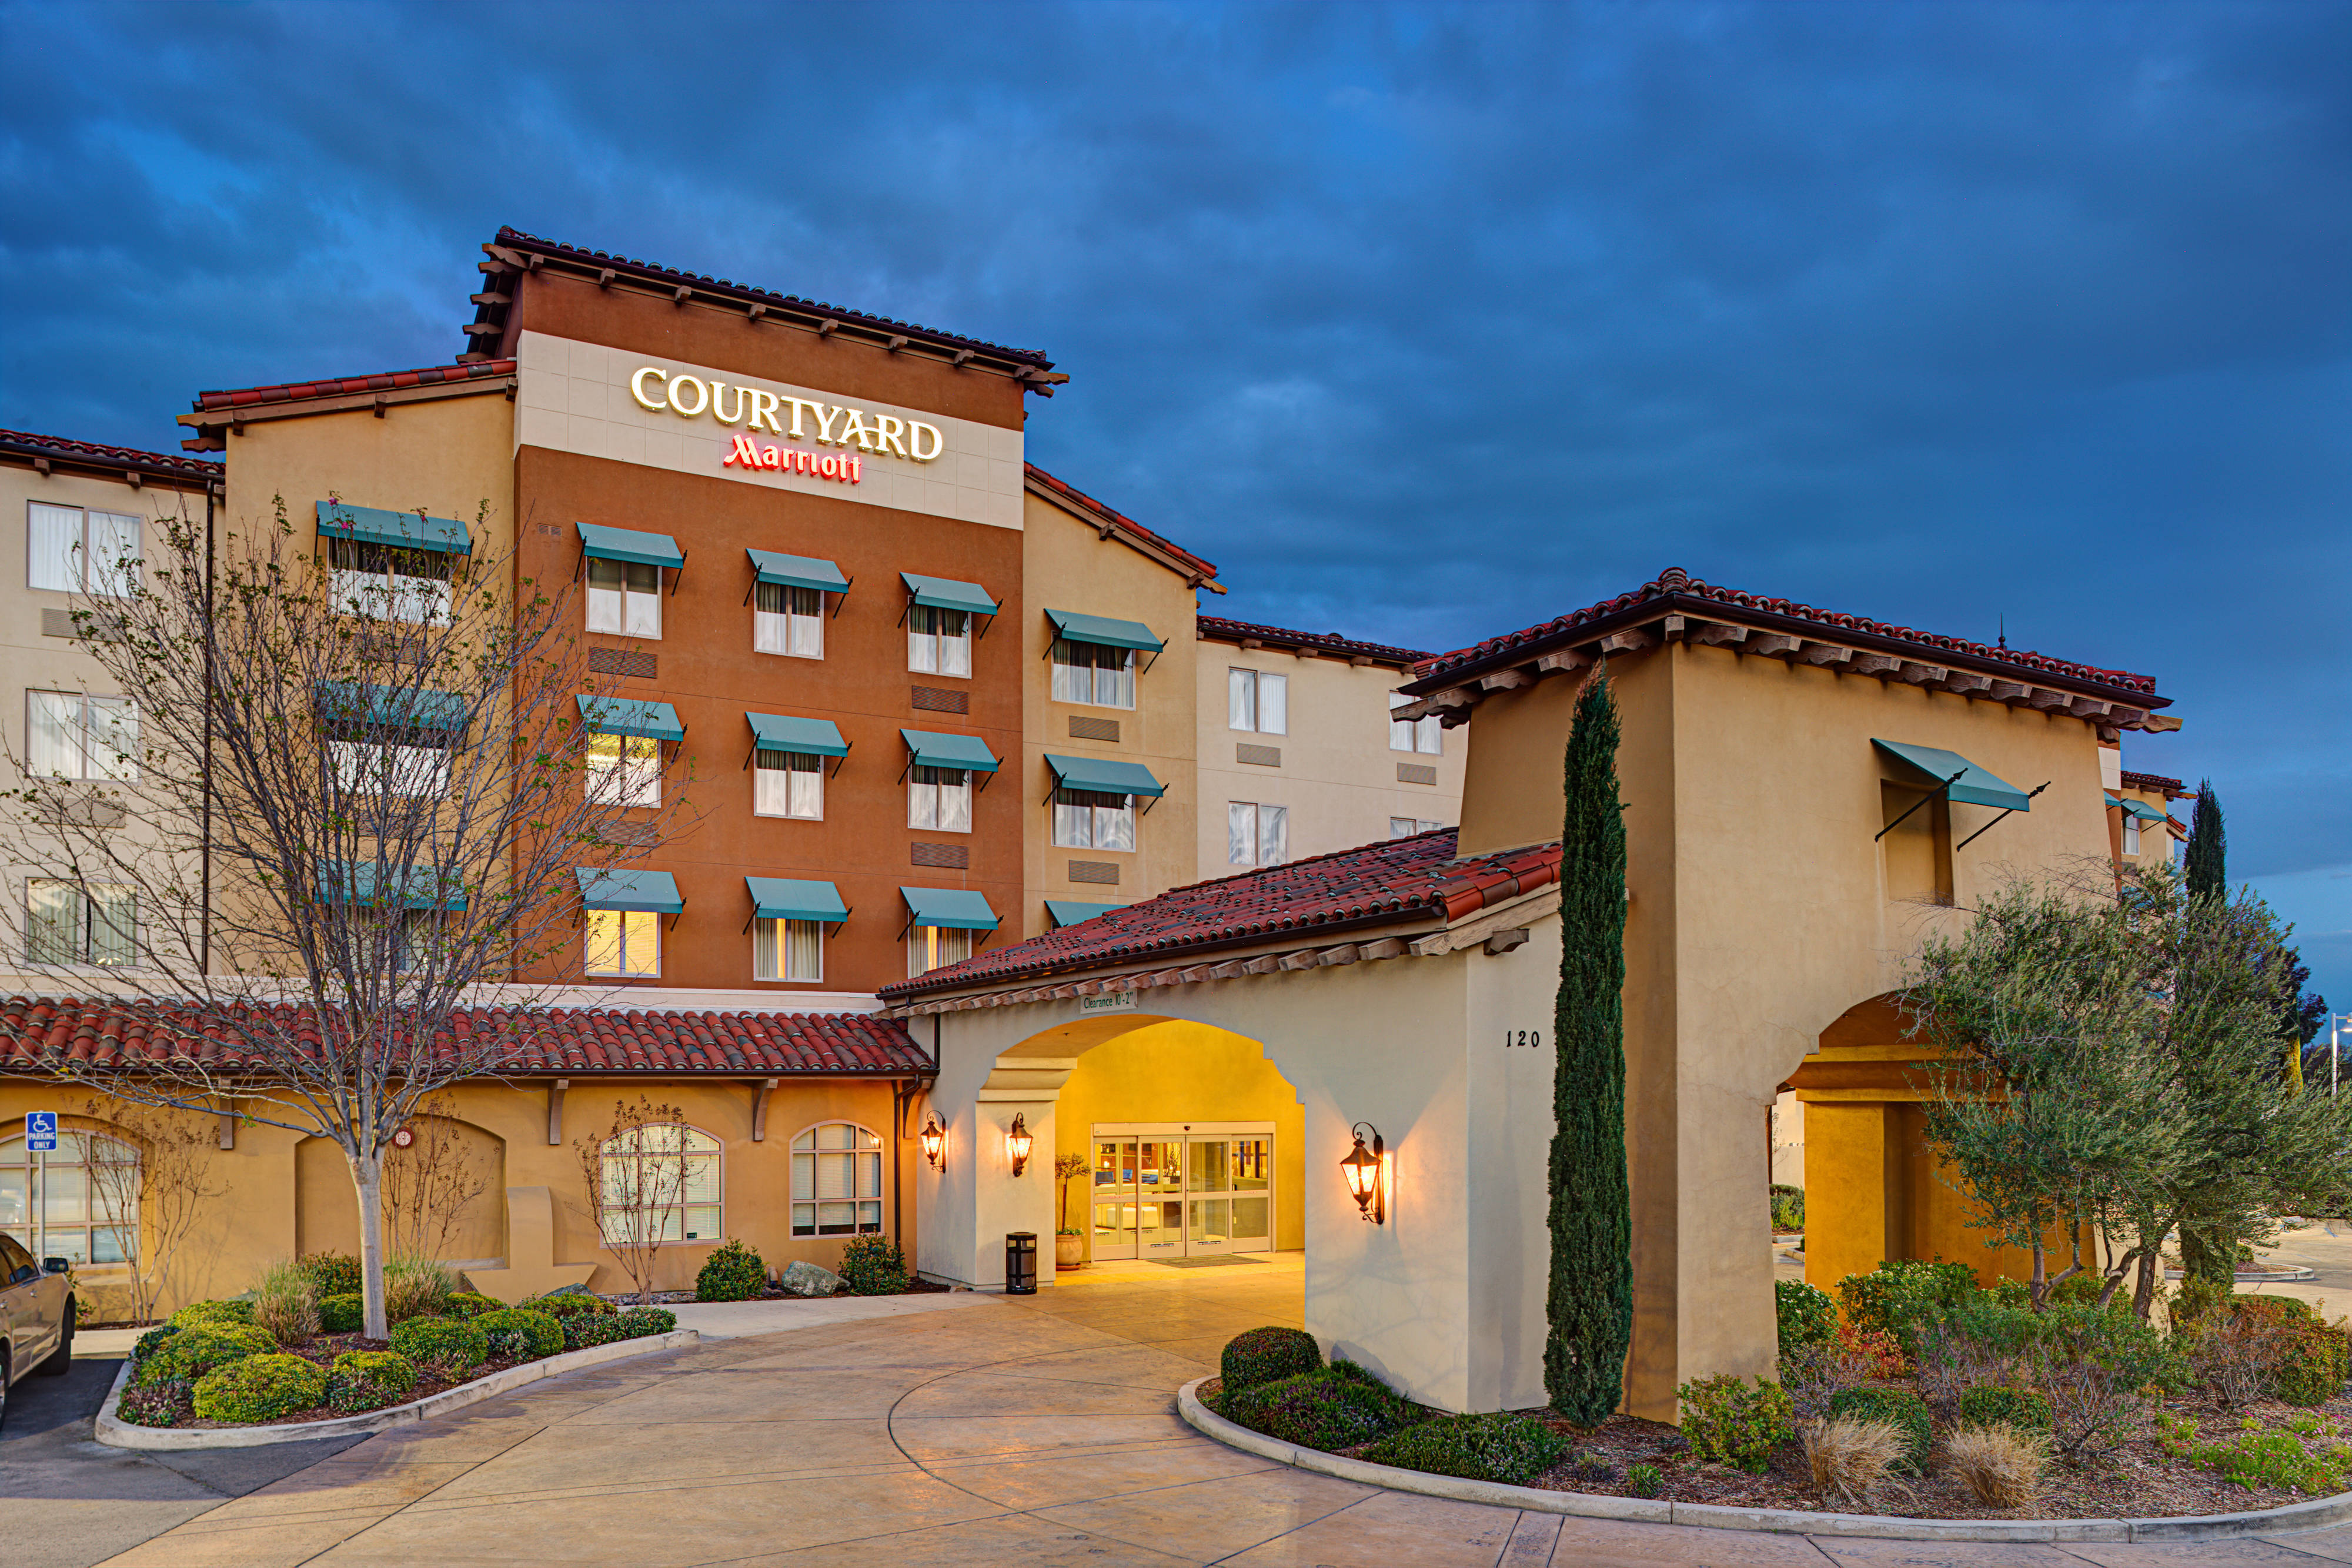 Photo of Courtyard by Marriott Paso Robles, Paso Robles, CA